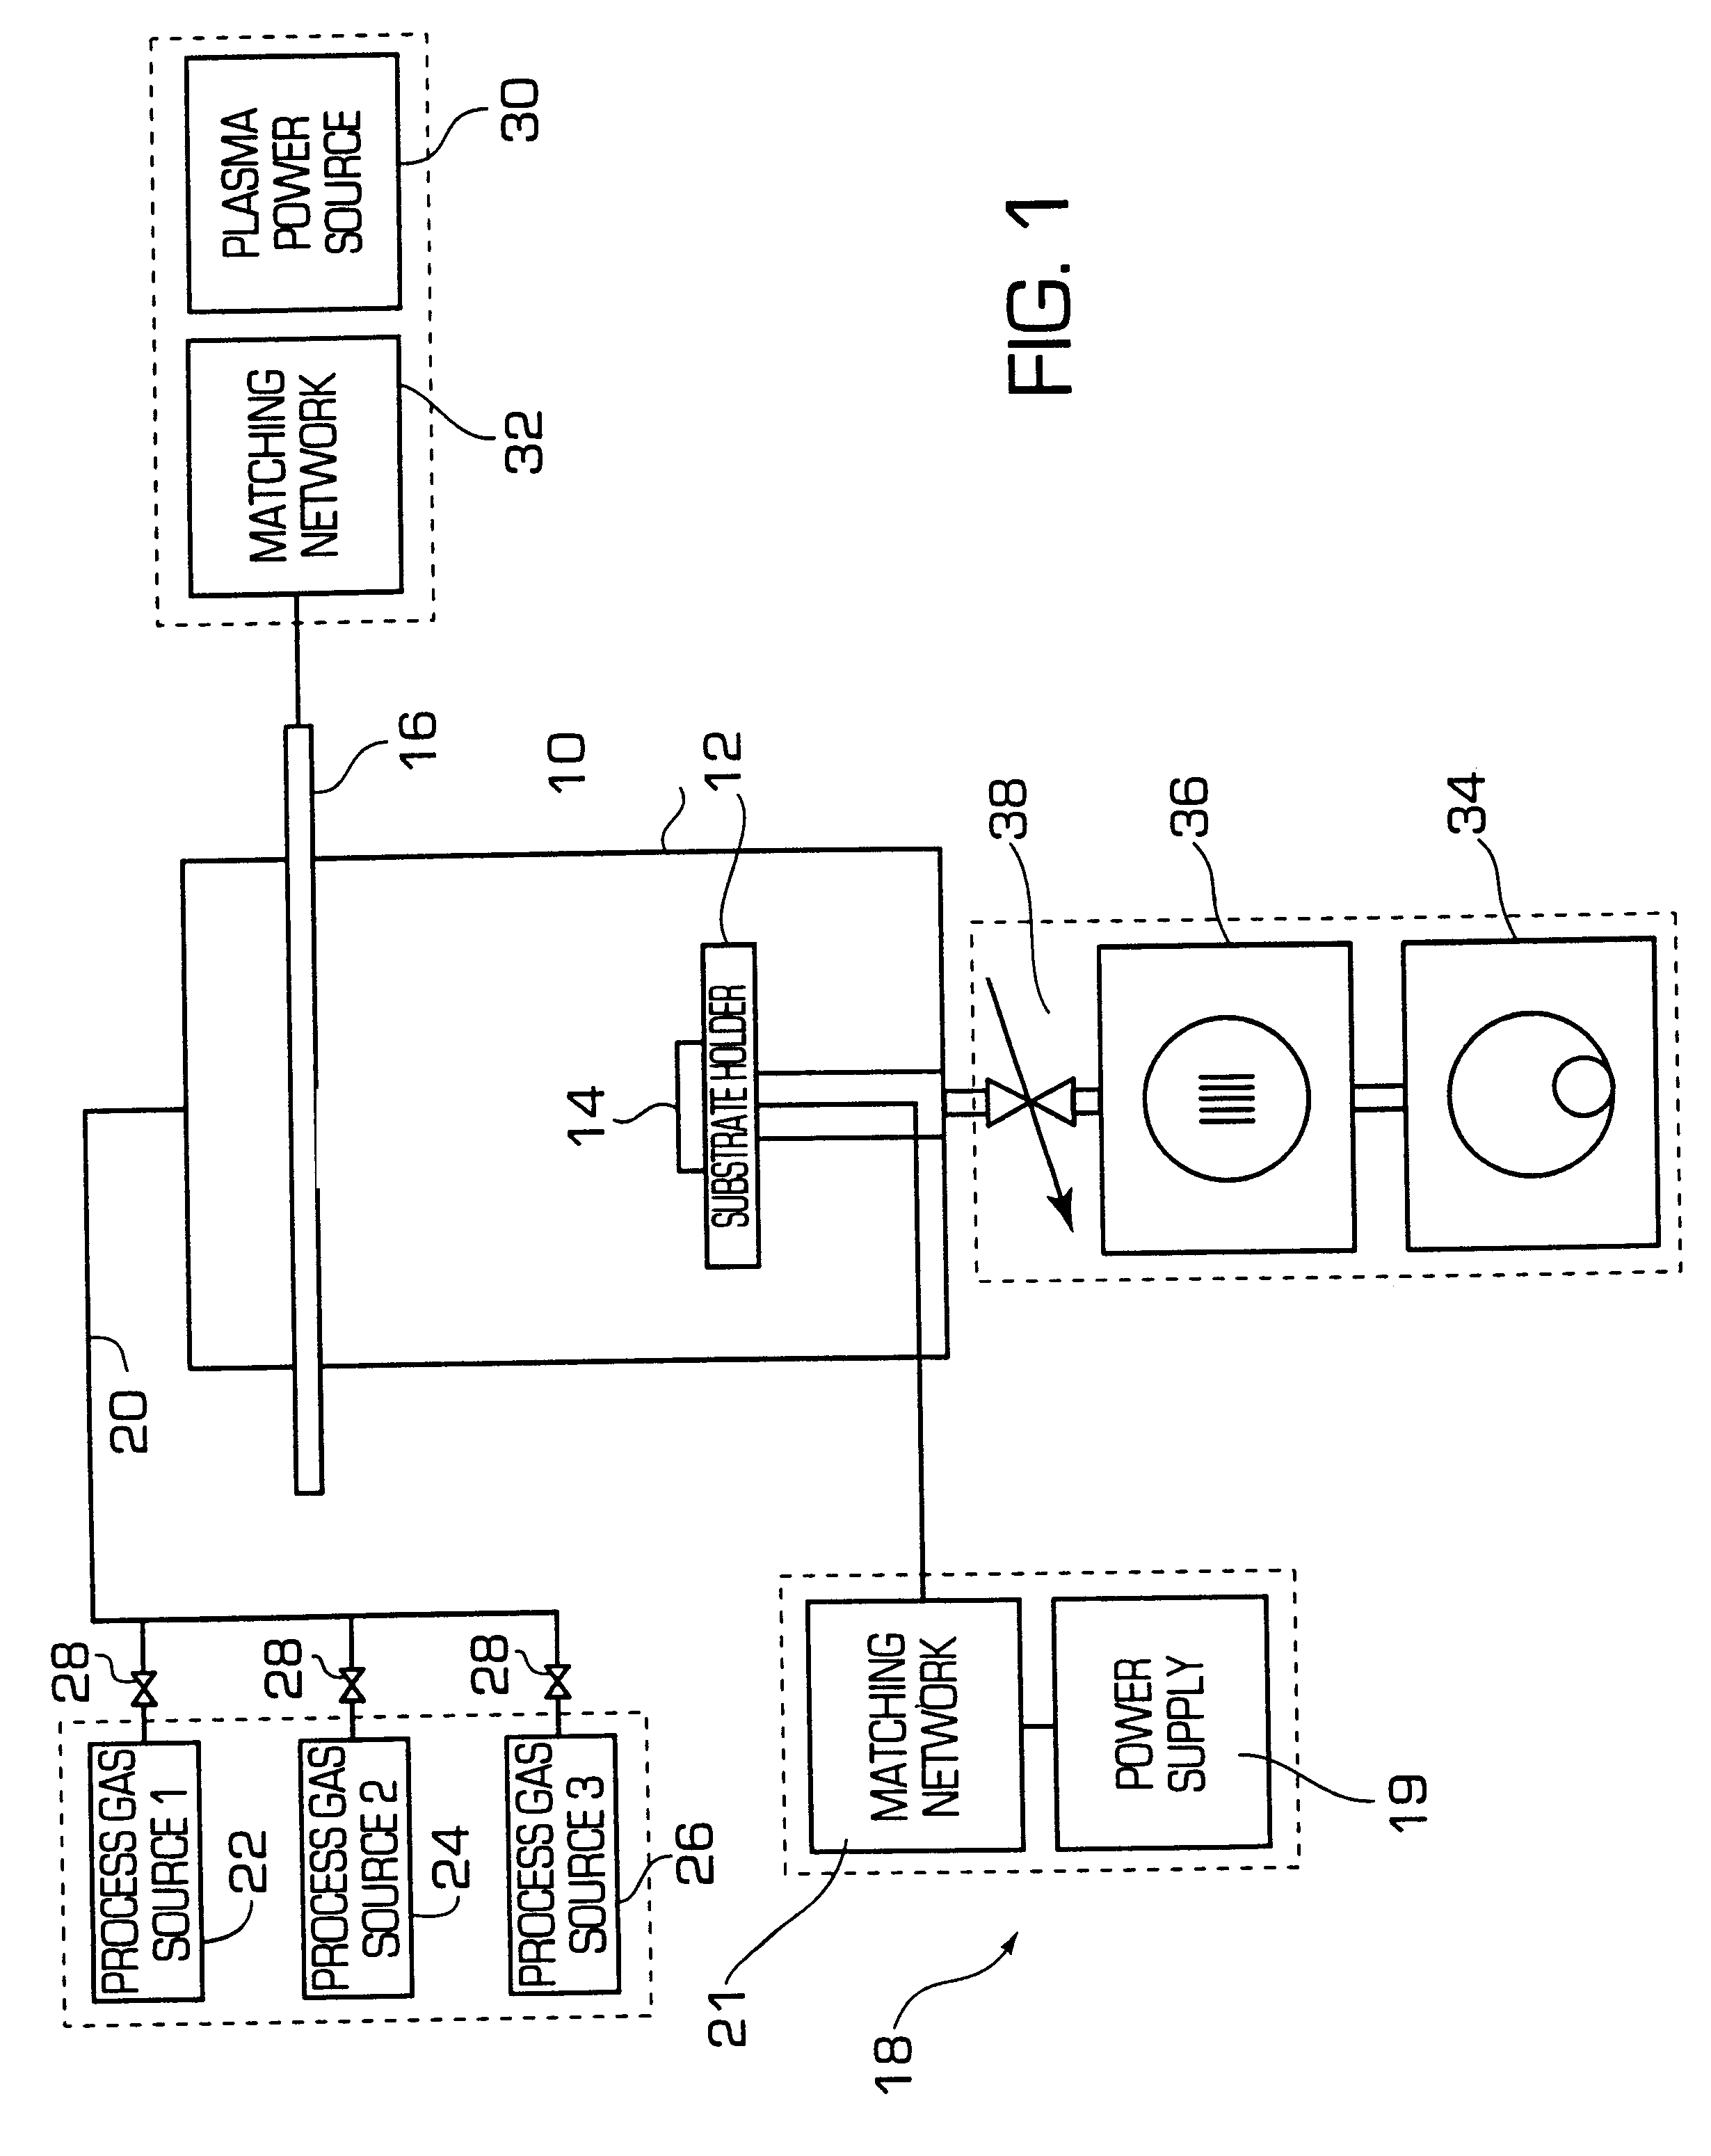 Method of anisotropic etching of substrates